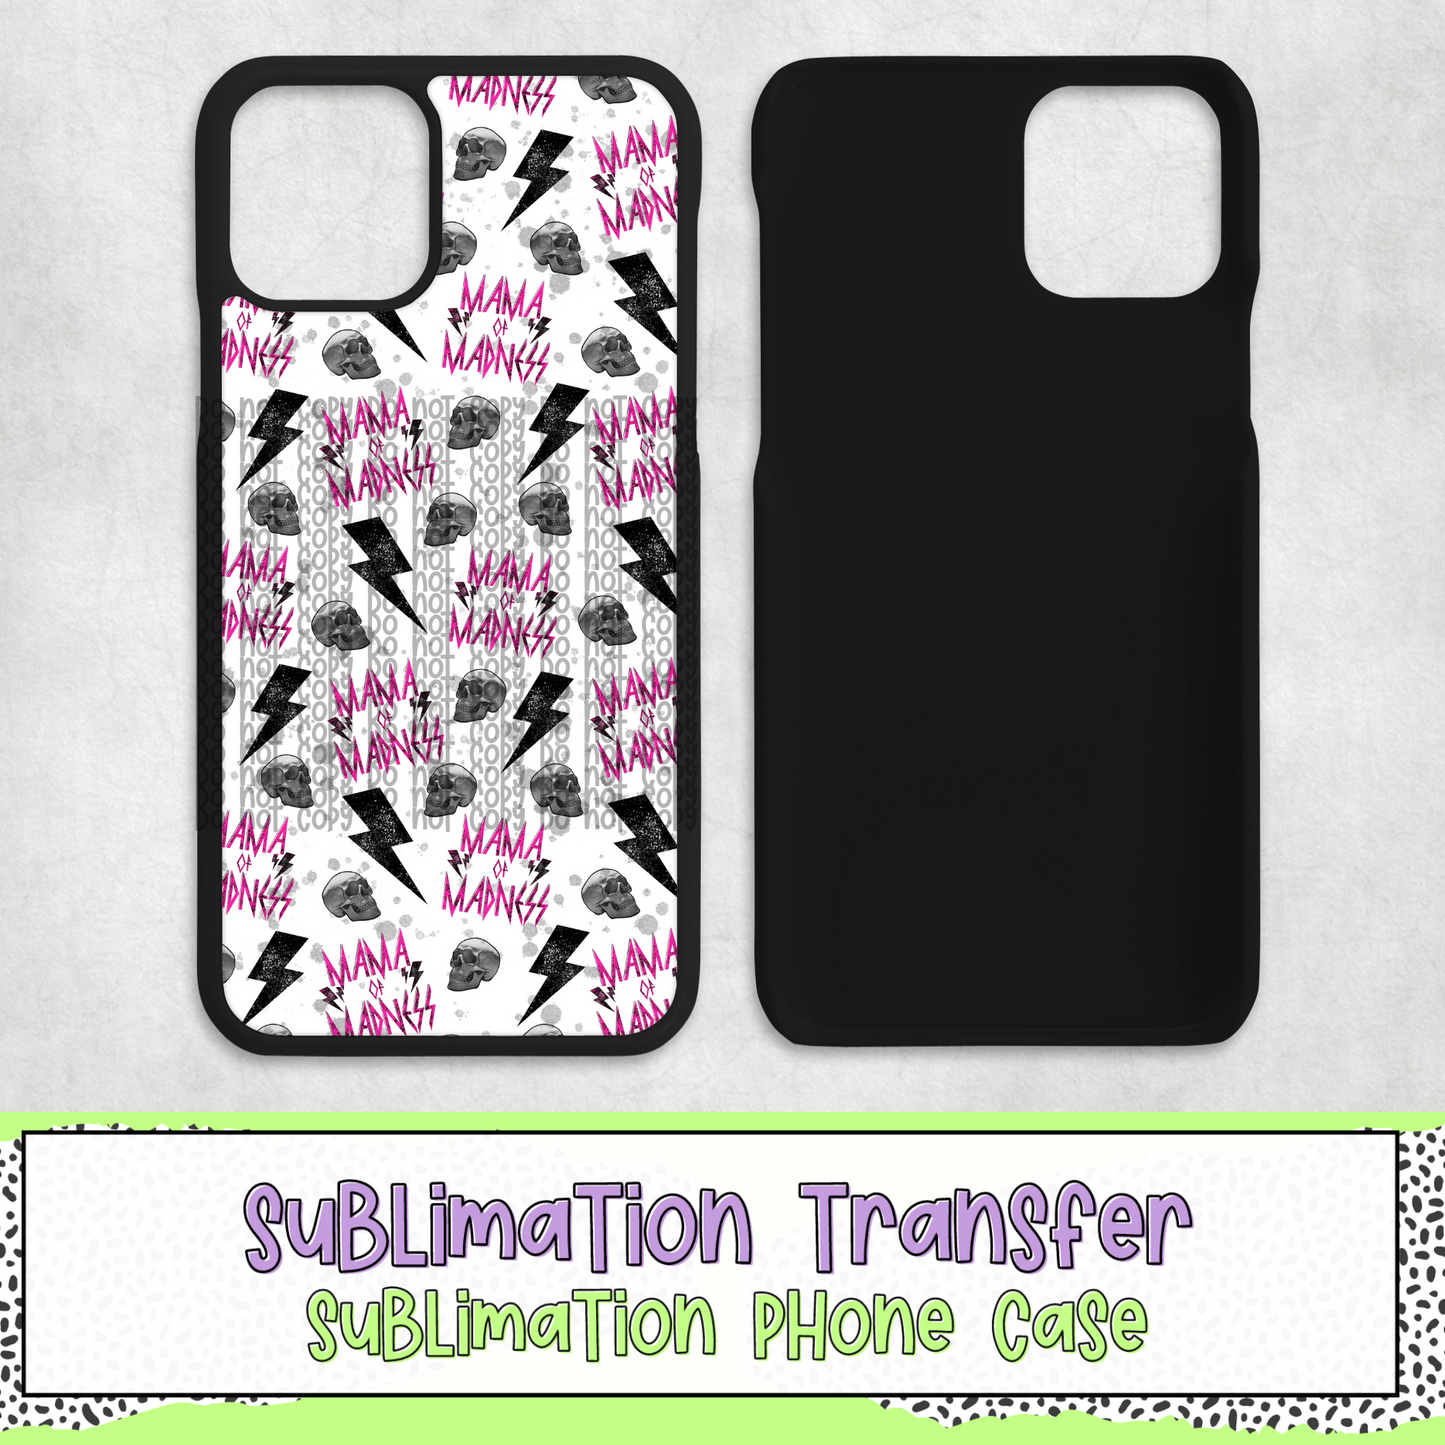 Mama of Madness - Phone Case Sublimation Transfer - RTS